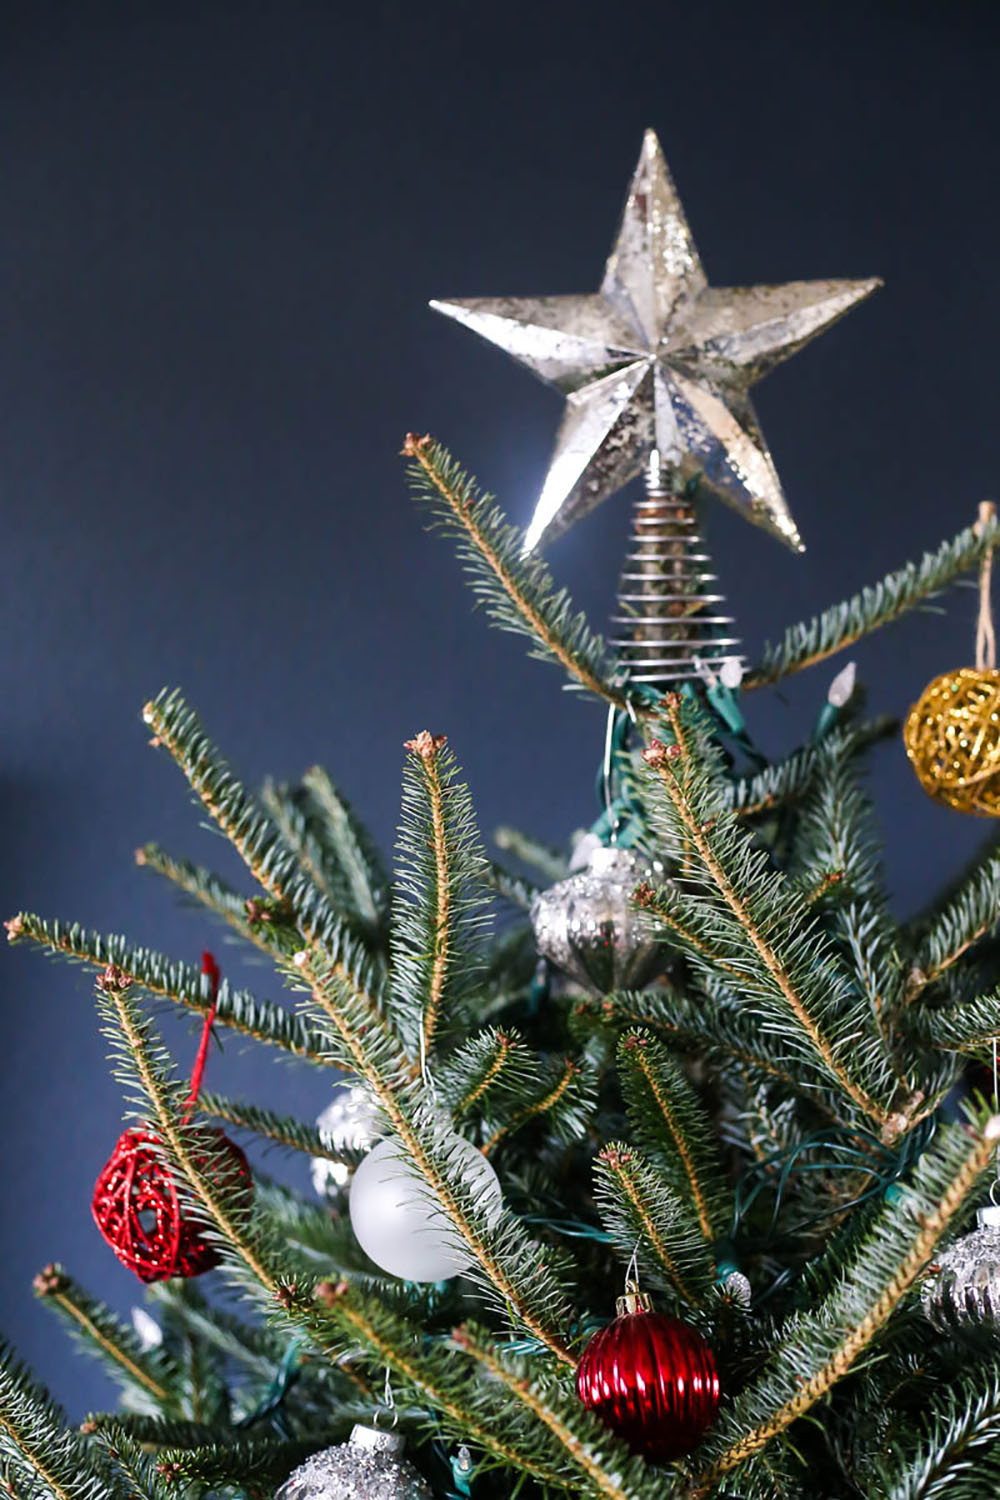 The top of a live Christmas tree decorated with a silver star topper.